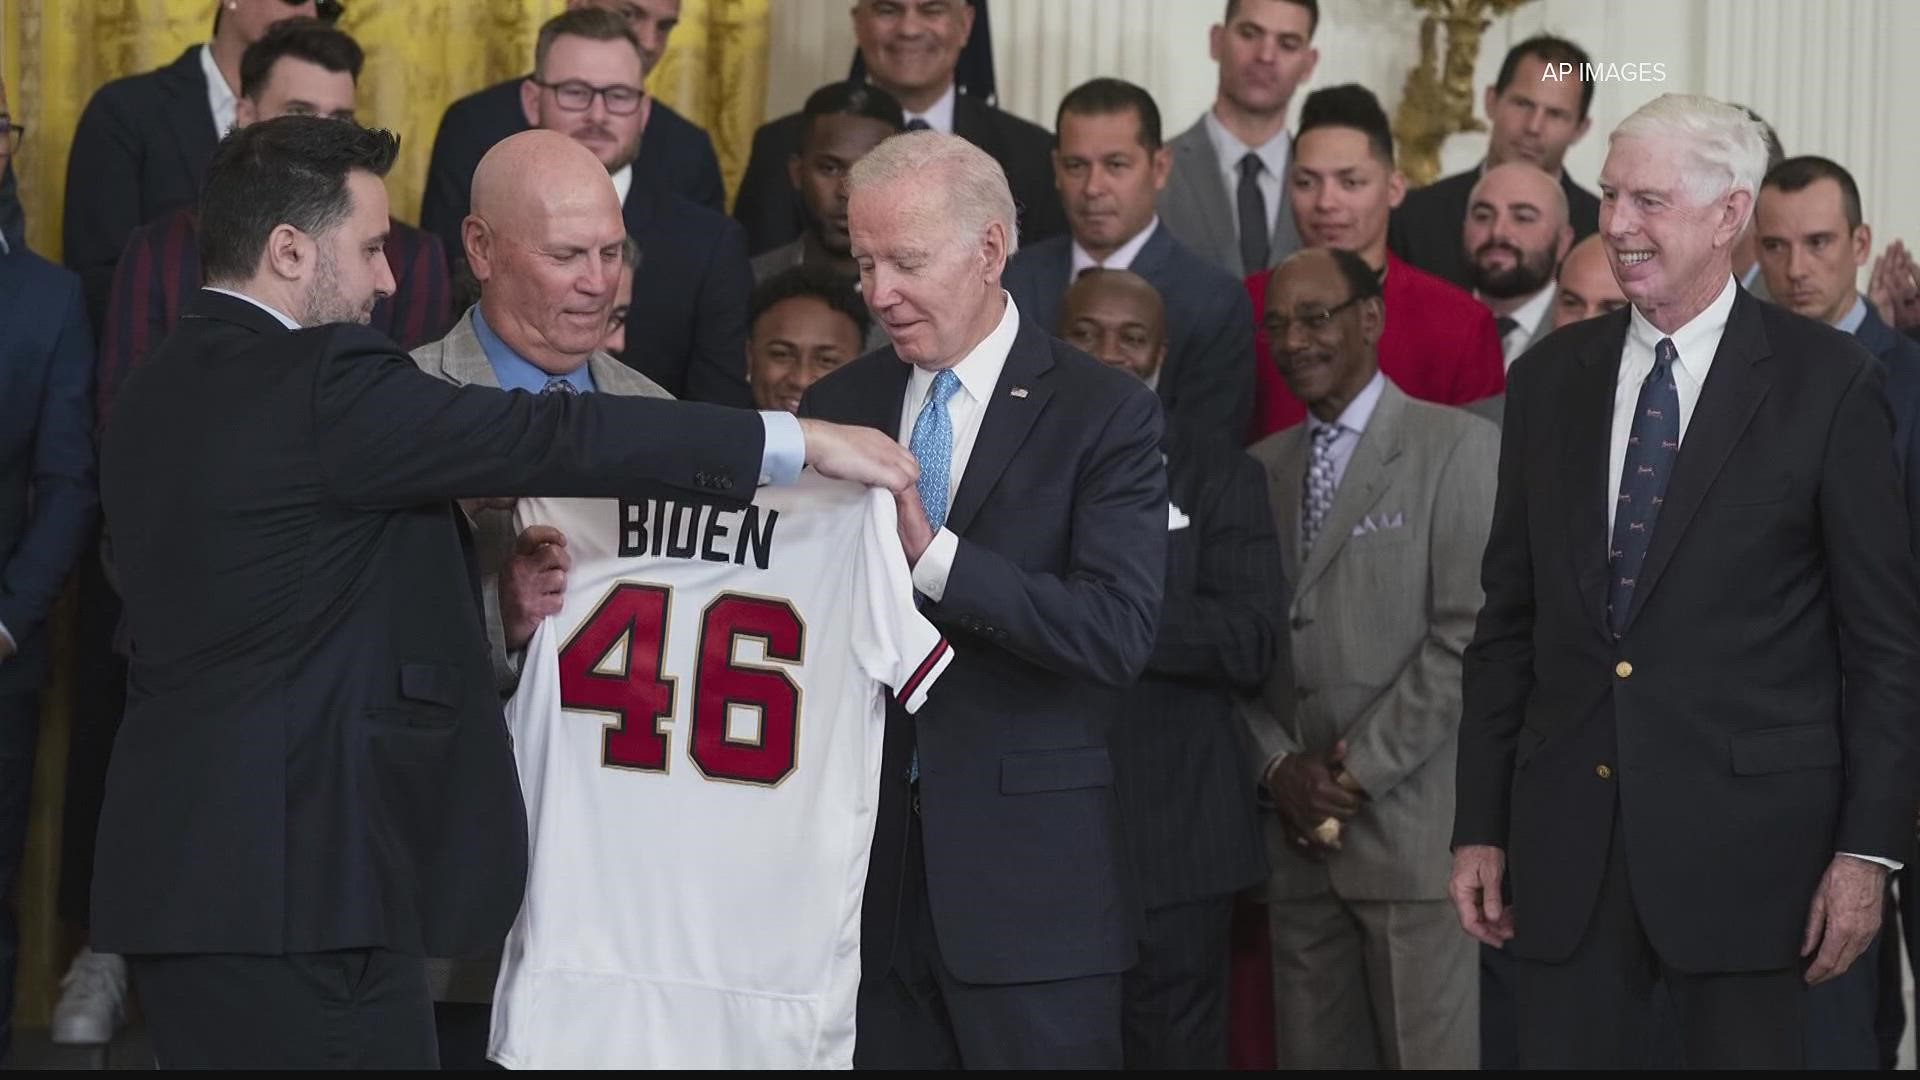 11Alive's Maria Martin spoke with multiple Braves players last week who said they are most excited to see the Oval Office and to shake the president's hand.